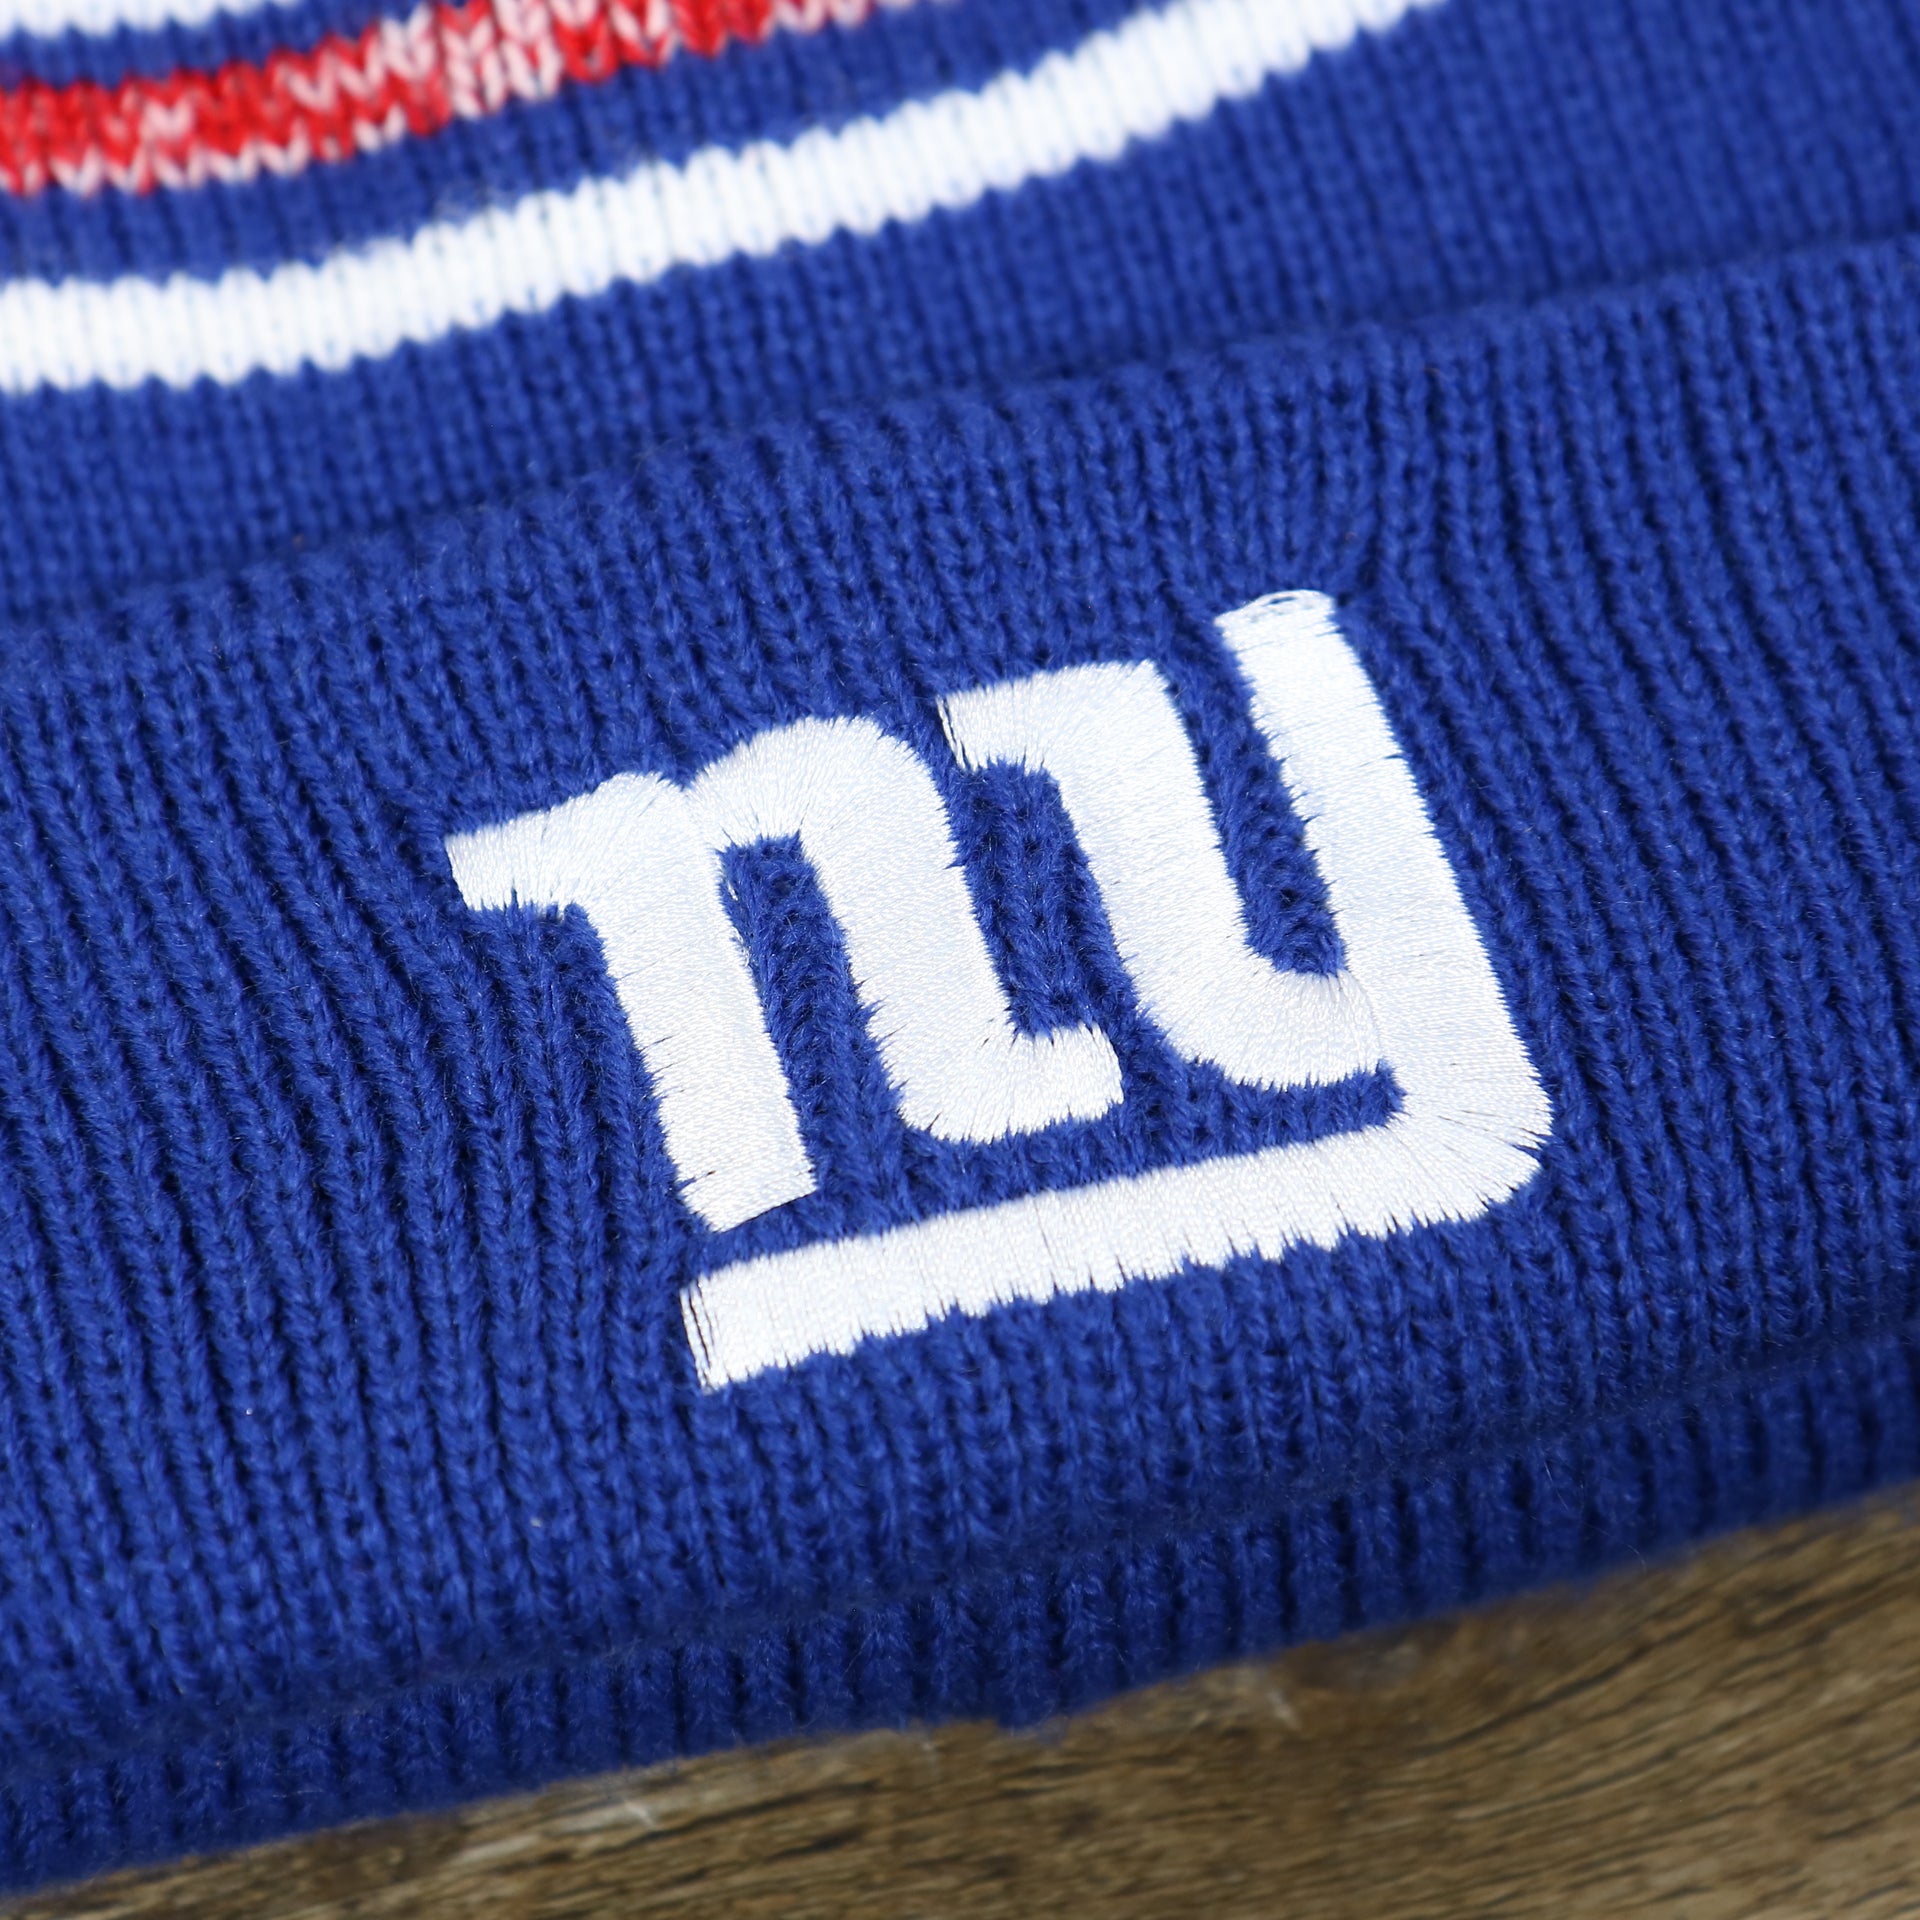 The Giants Logo on the Kid’s New York Giants Striped Pom Pom Winter Beanie | Royal Blue, Red, And White Beanie